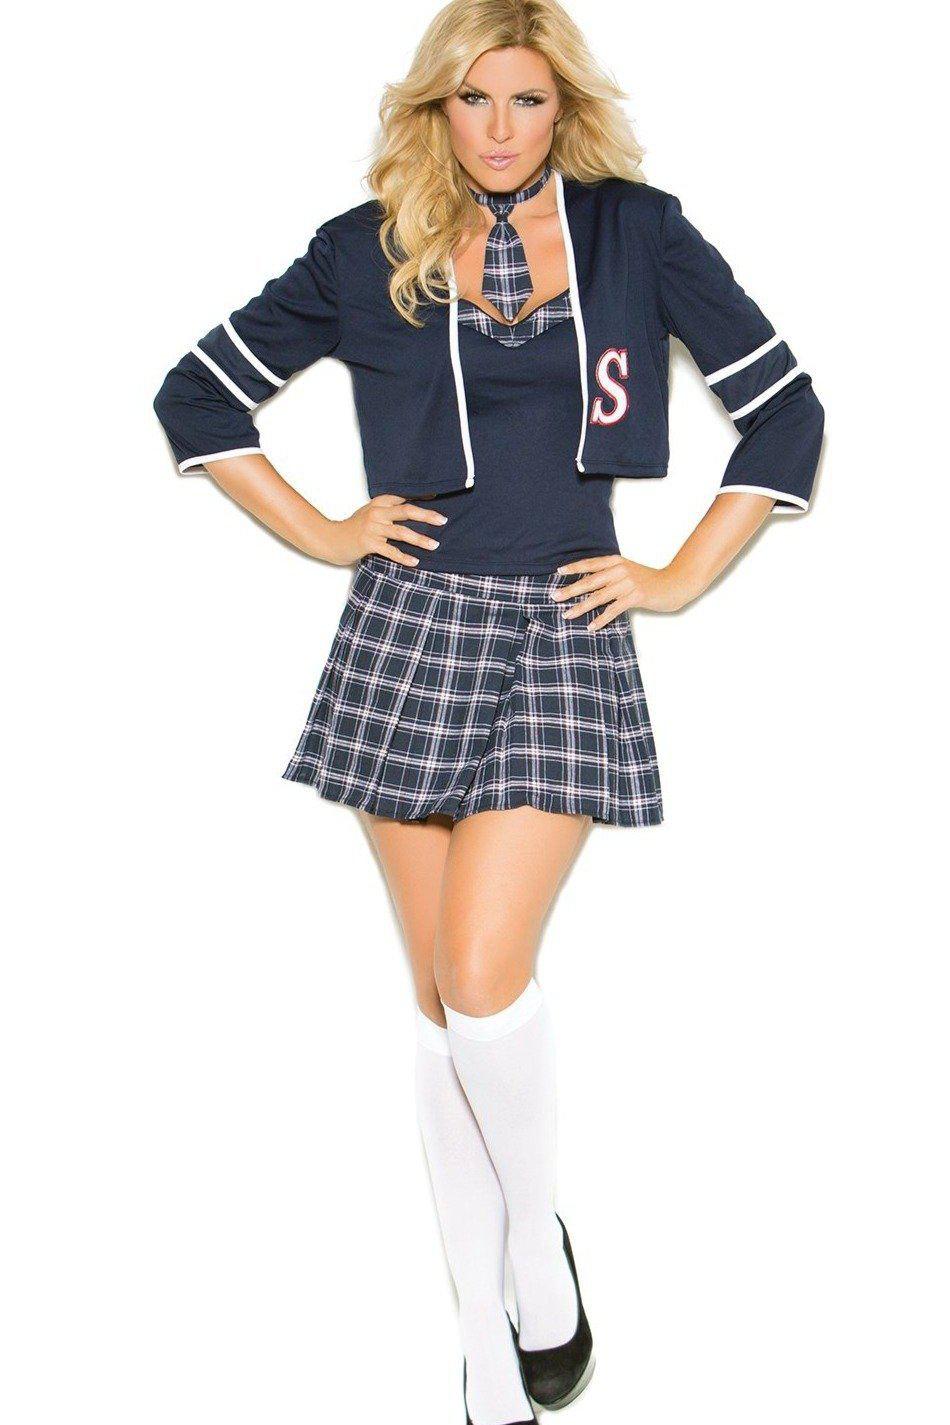 Plus Size Class Distraction School Girl Costume-School Girl Costumes-Elegant Moments-SEXYSHOES.COM